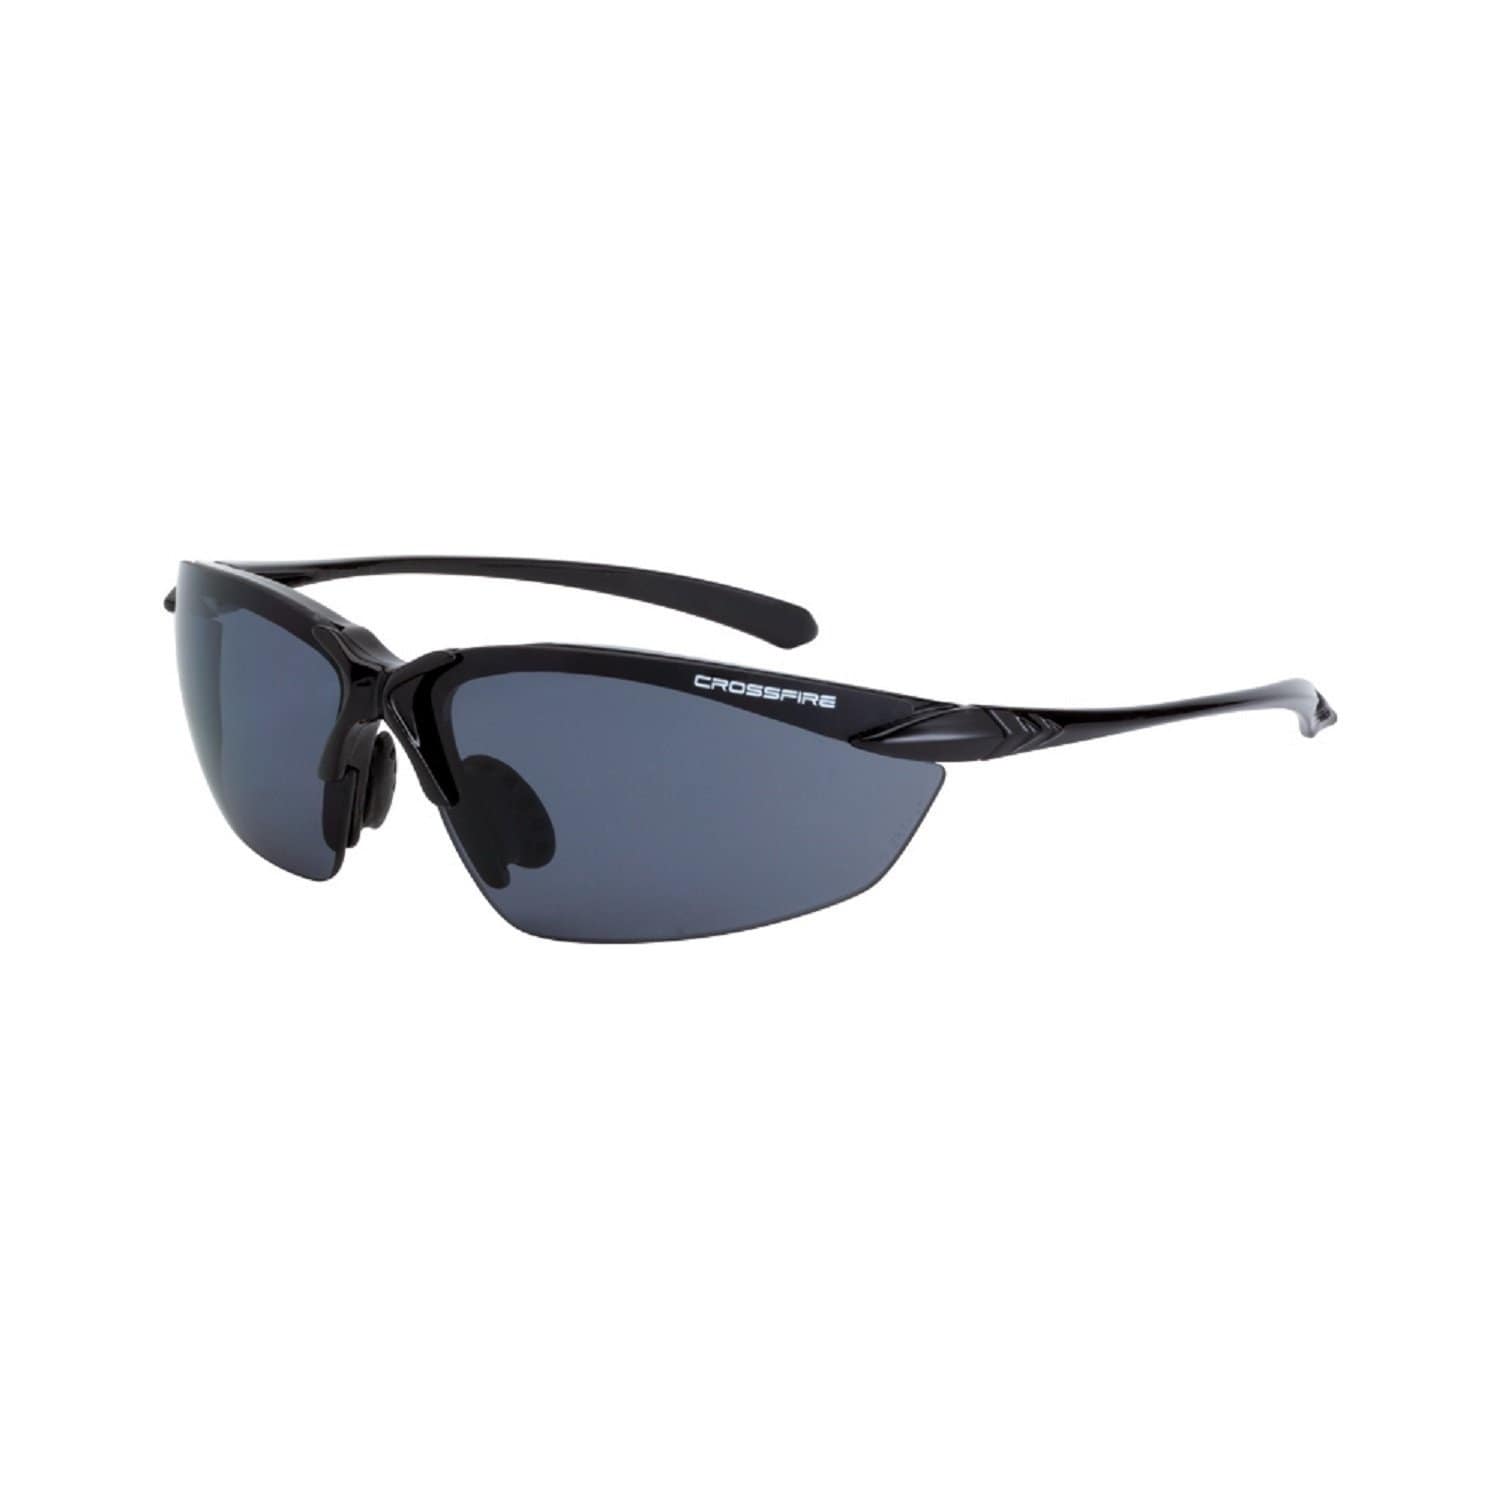 Crossfire Apparel : Eyewear - Safety/Shooting Chassis Shinny Black Frame with Smoke Polarized Lens